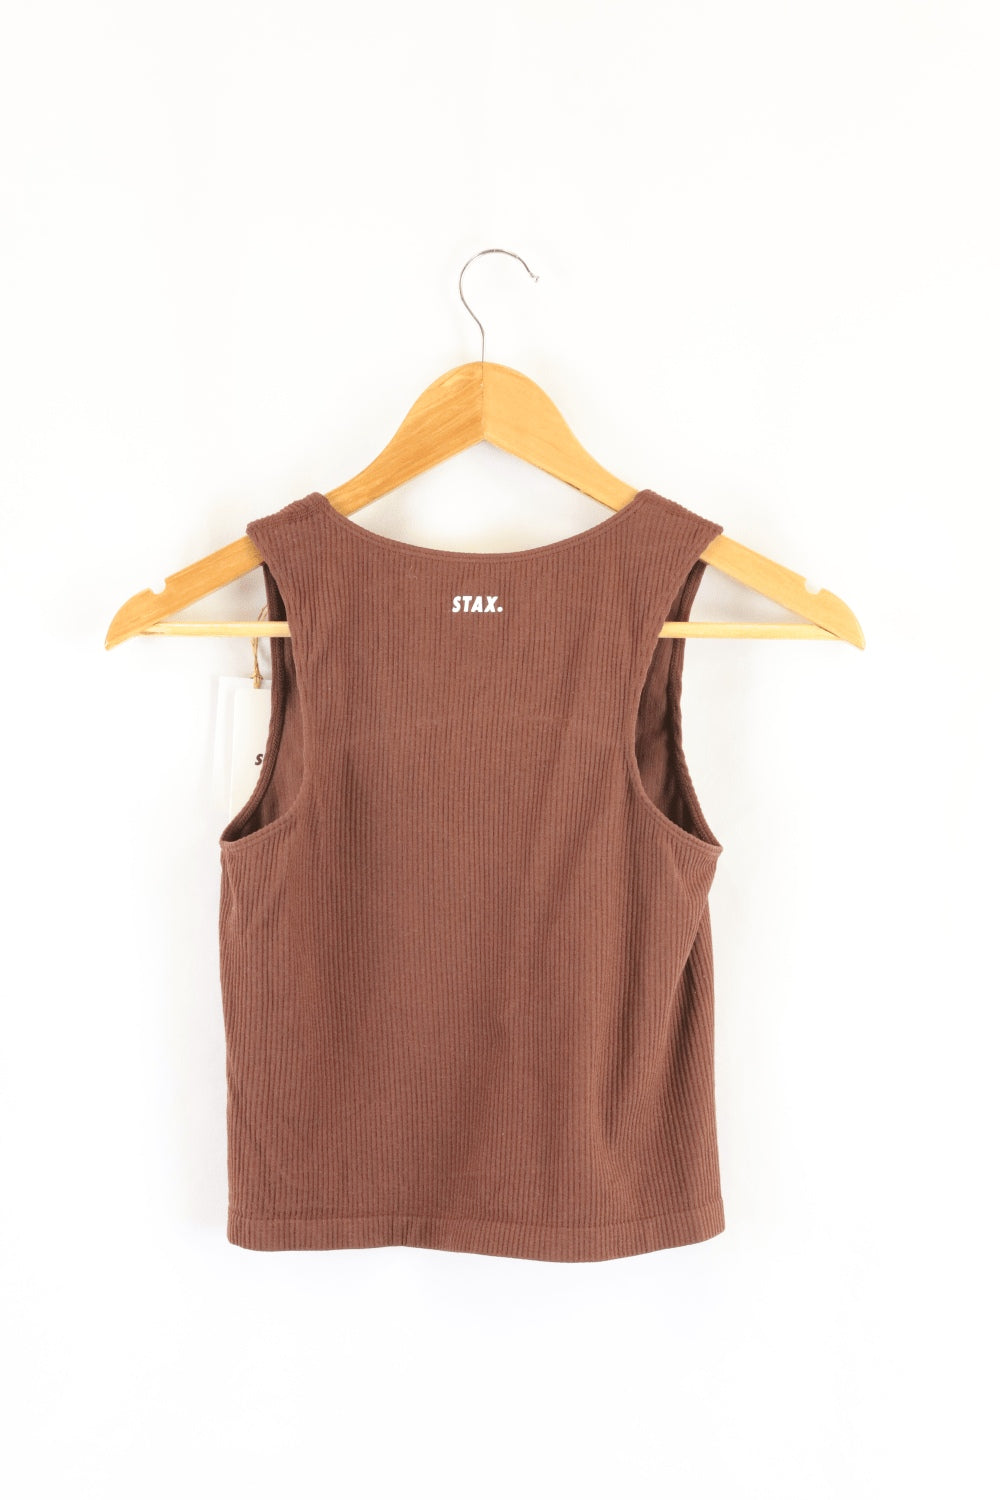 Stax. Brown Ribbed Crop Top S - Reluv Clothing Australia